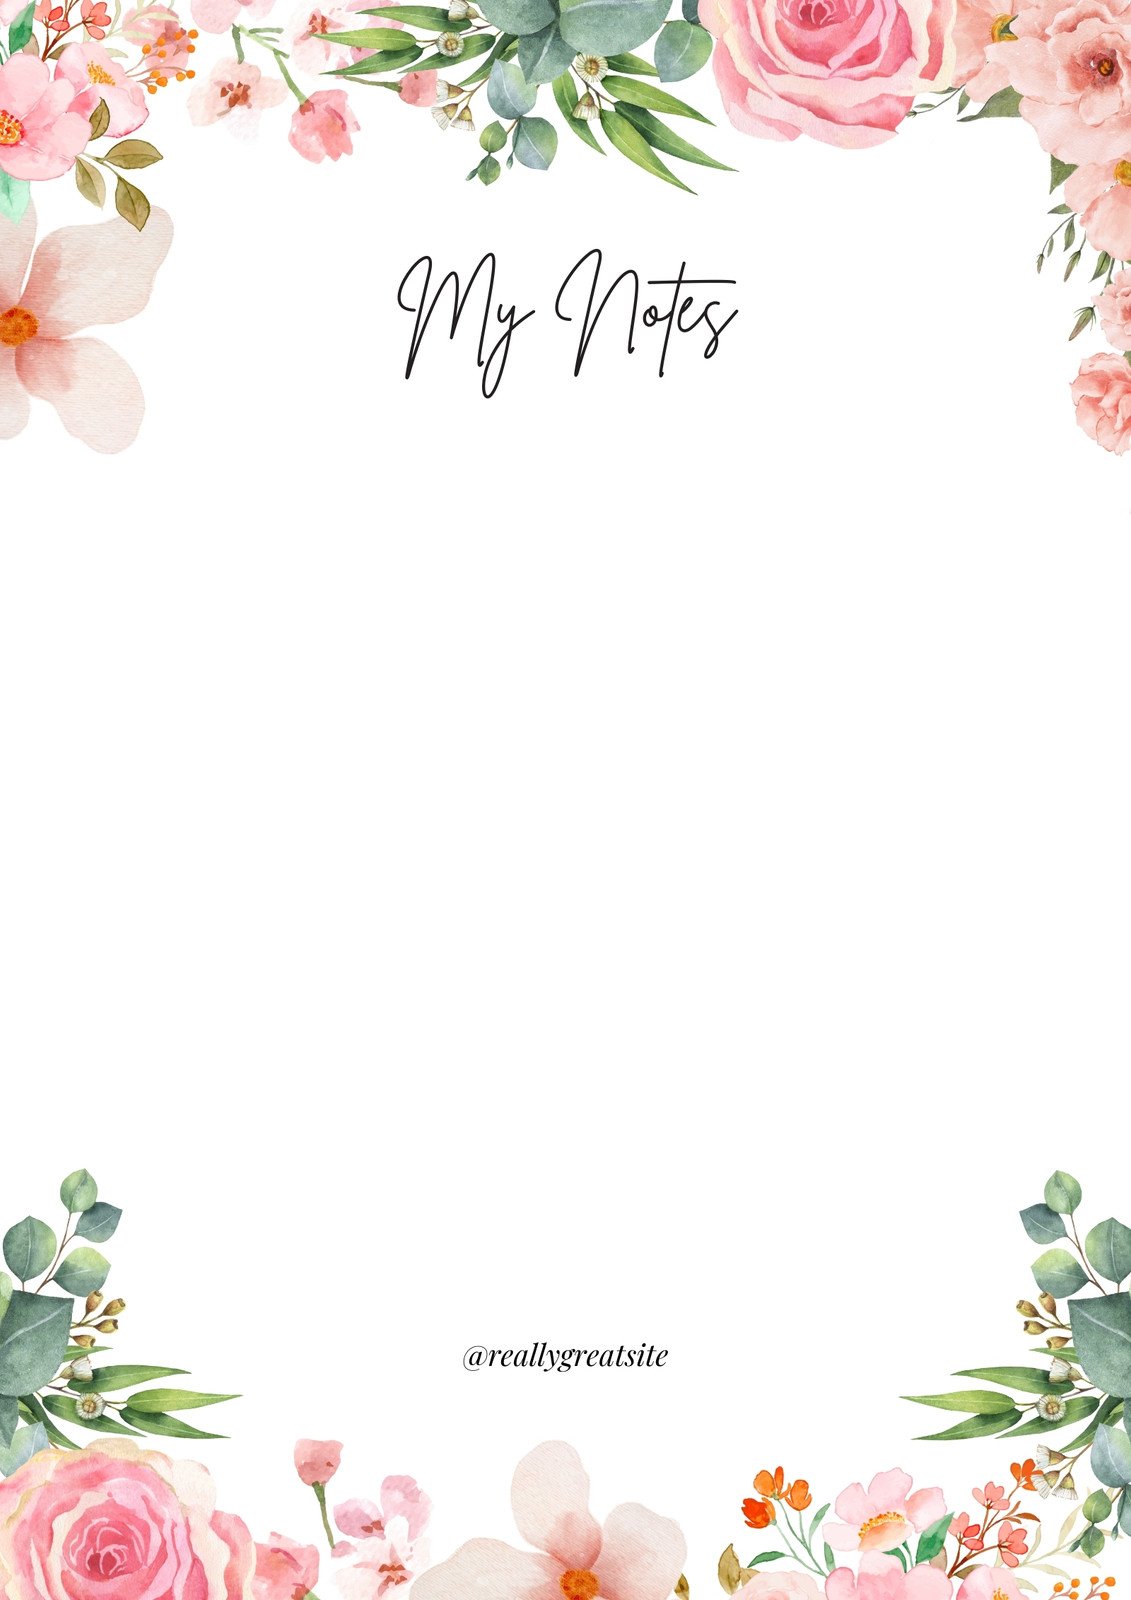 Free Paper Flowers Design Elements in Neon Yellow